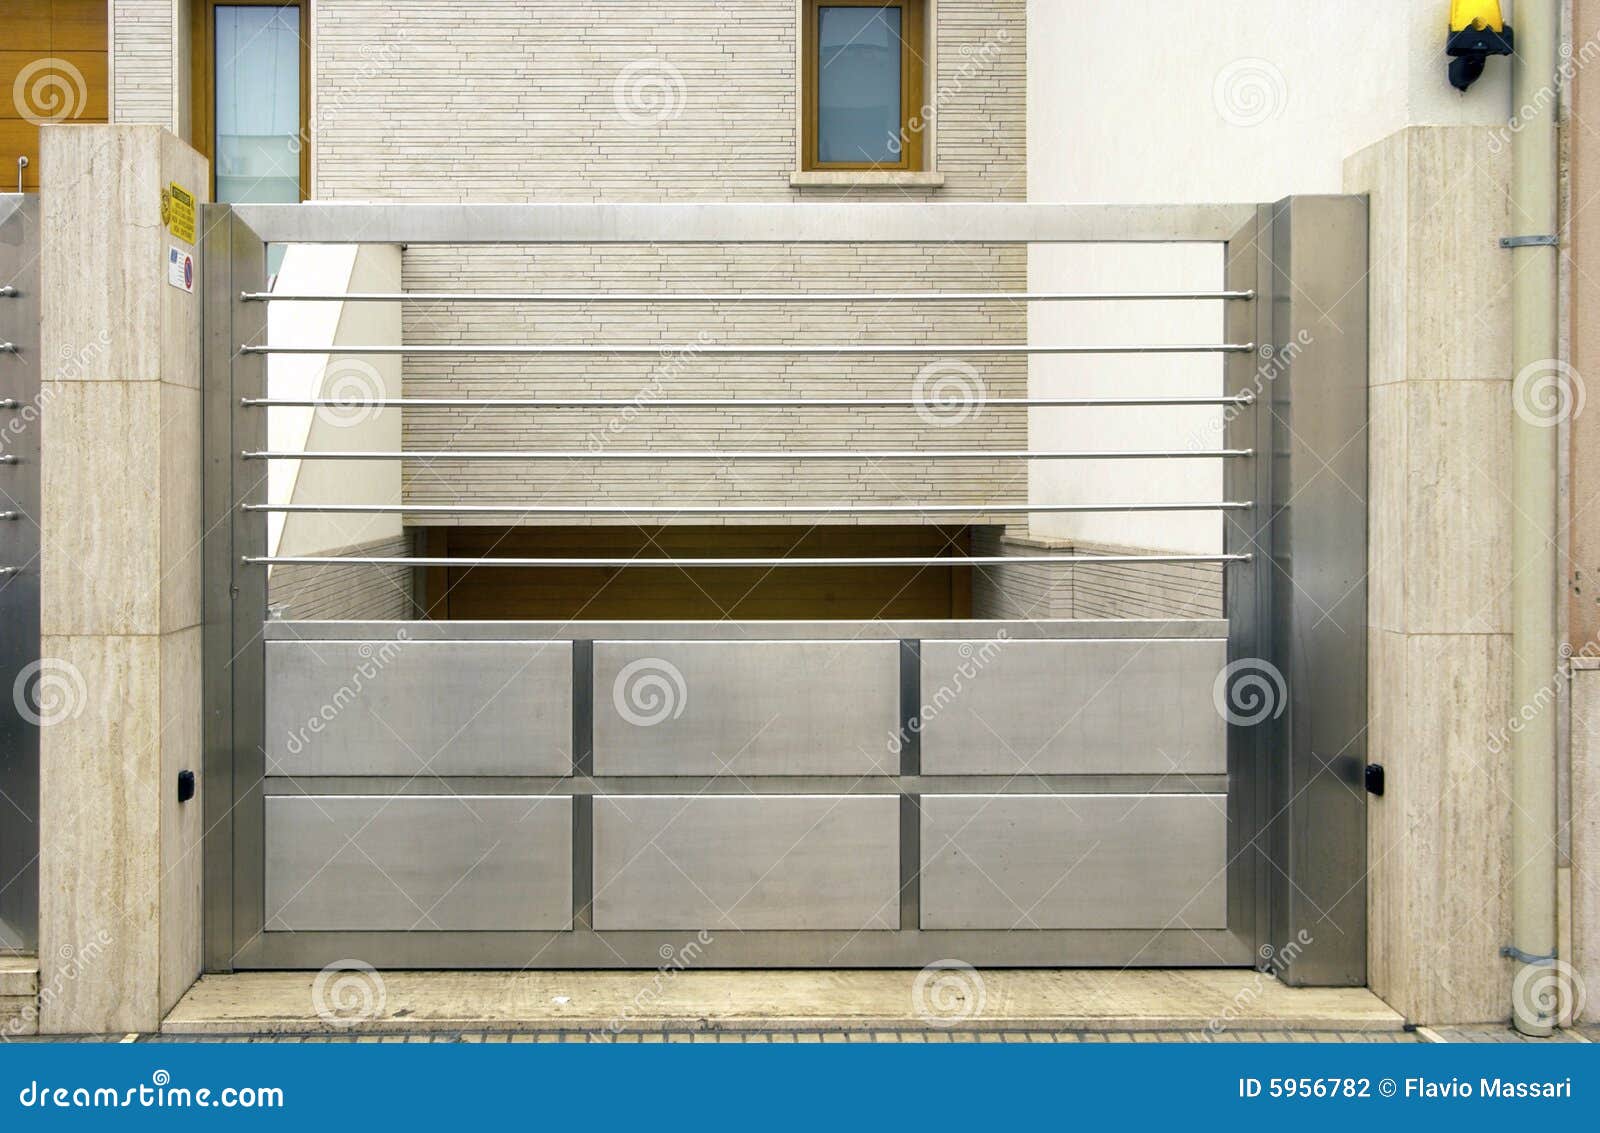 Stainless steel gate stock photo. Image of stainless, decoration ...